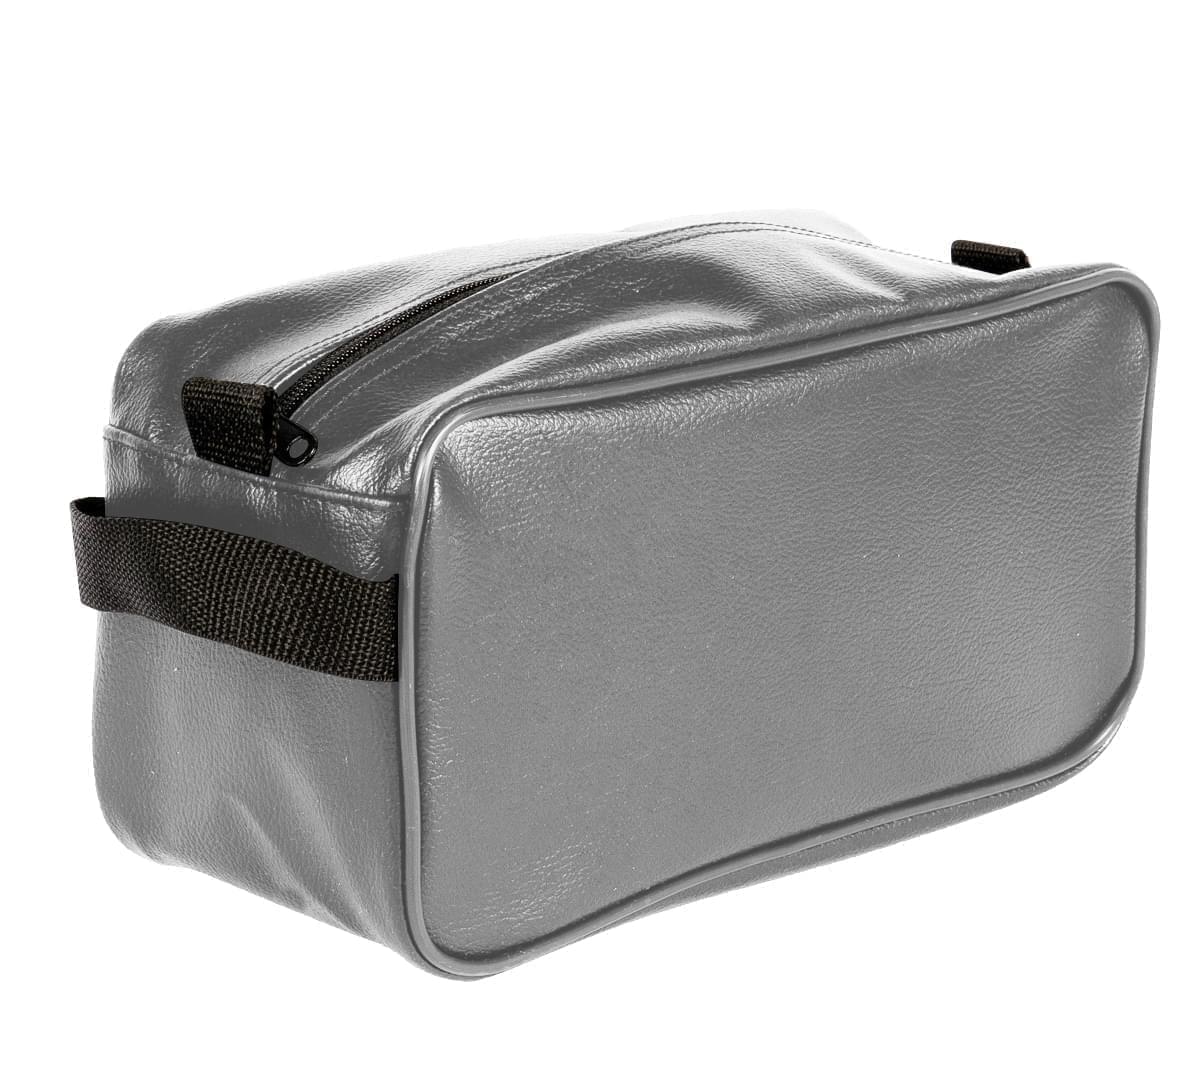 USA Made Cosmetic & Toiletry Cases, Grey-Black, 3000996-A1R